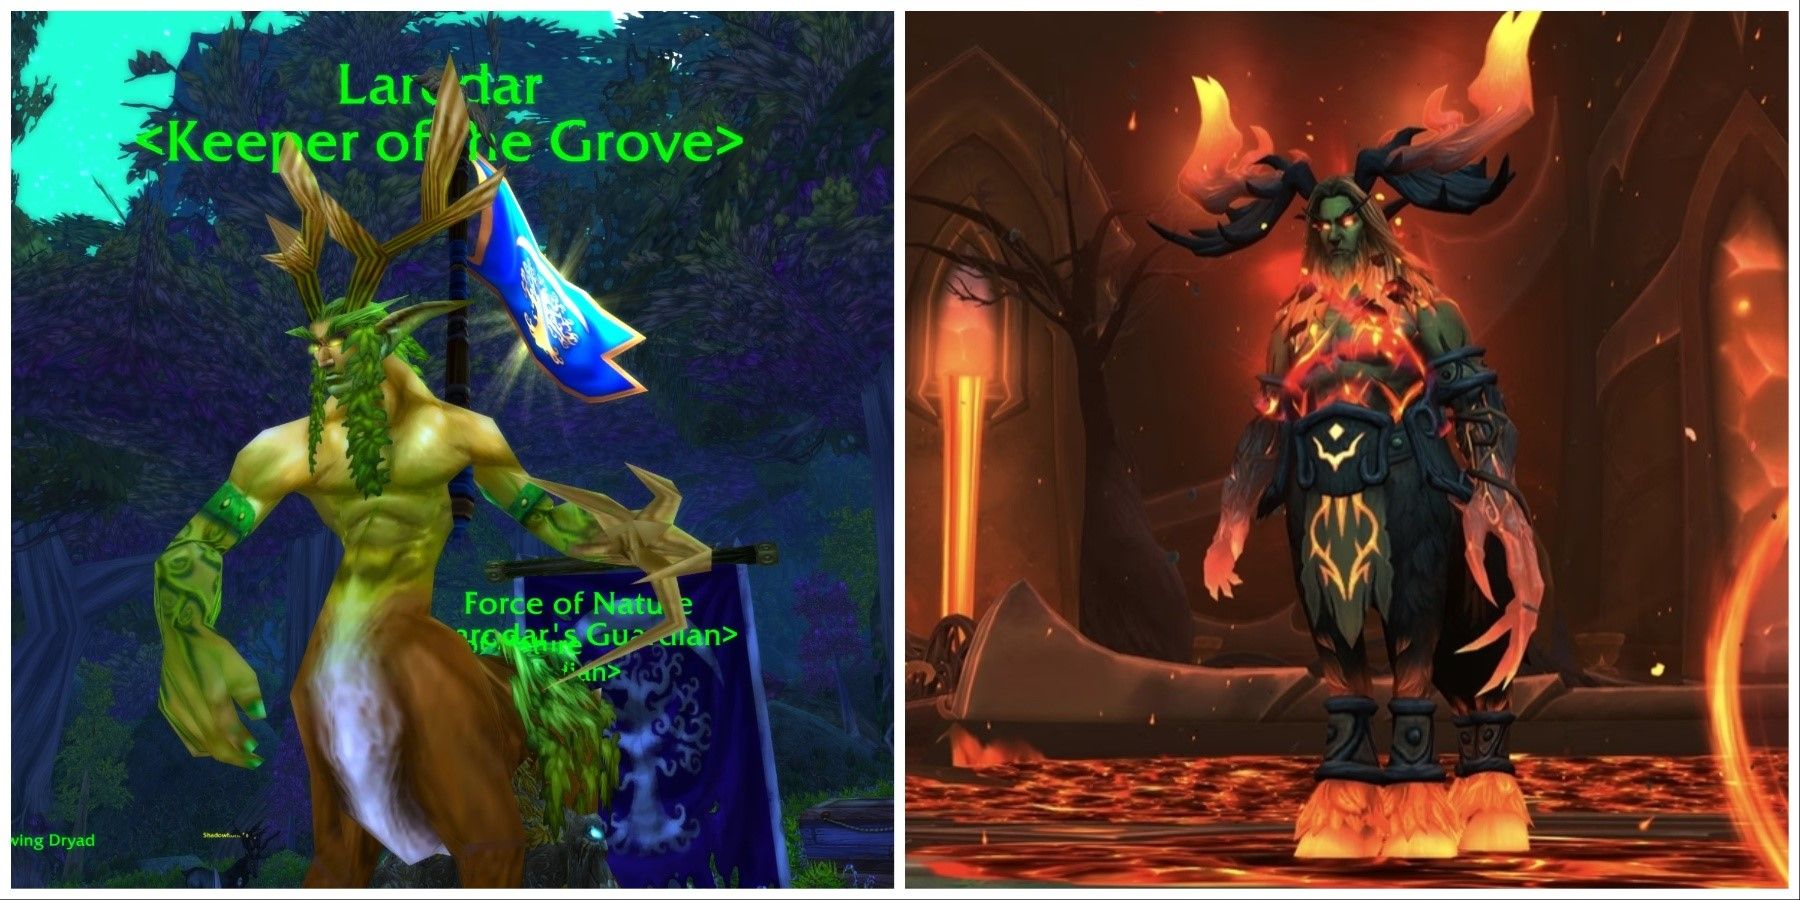 larodar the keeper of the grove in WoW Cassic season of discovery and in Amirdrassil in Dragonflight